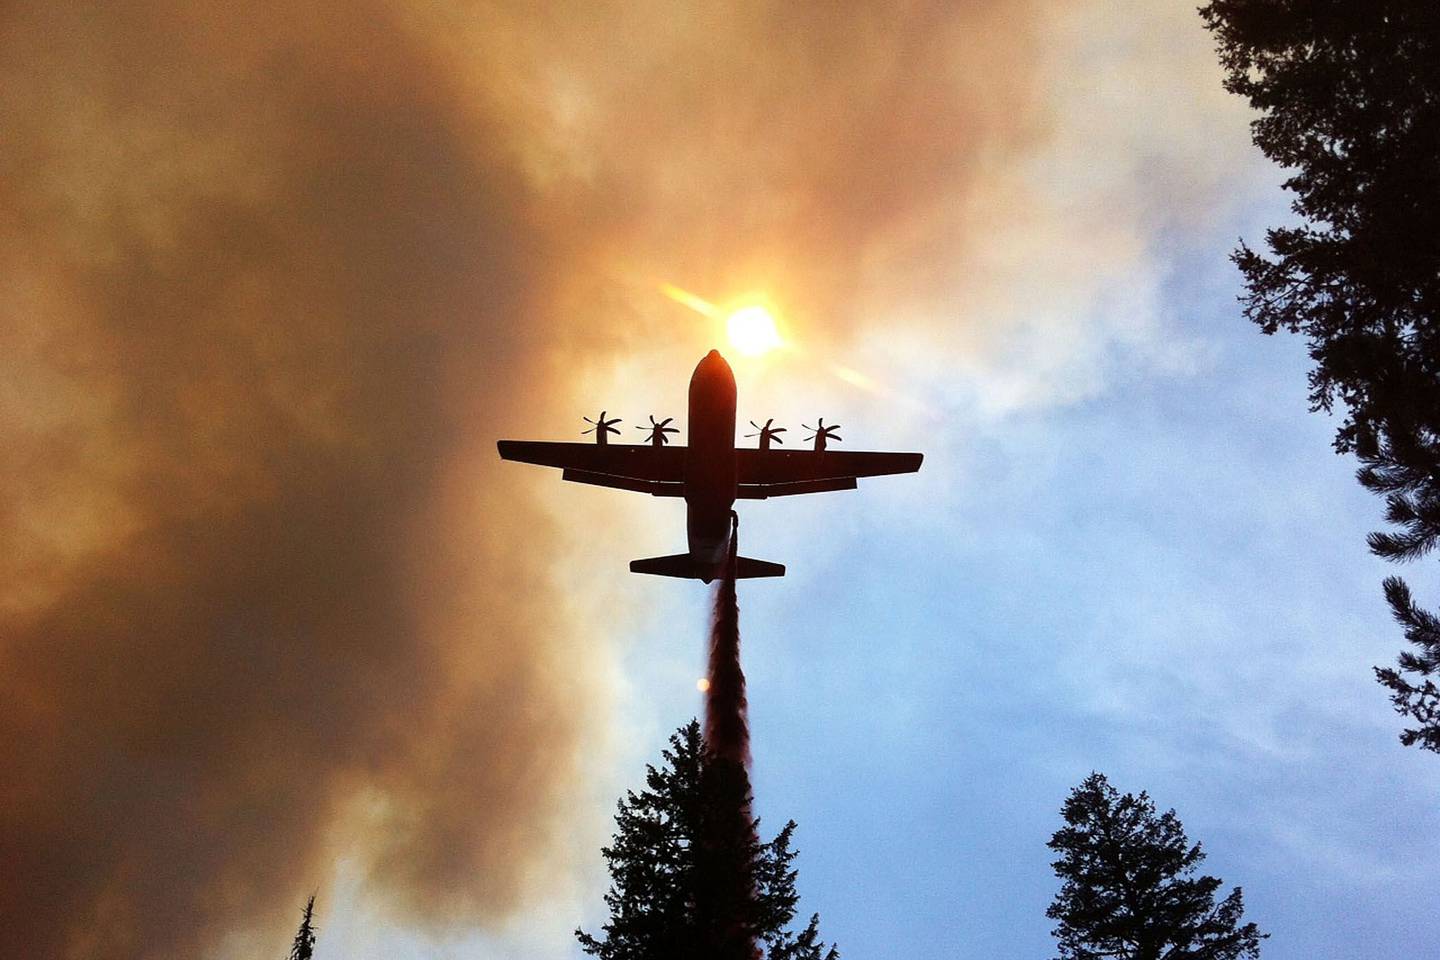 WILDFIRE ASSISTANCE -- A California Air National Guard C130-J Hercules, equipped with Modular Airborne Firefighting System, drops retardant on a wildfire near Twin Falls, Idaho, Aug. 8, 2012. (DOD photo)